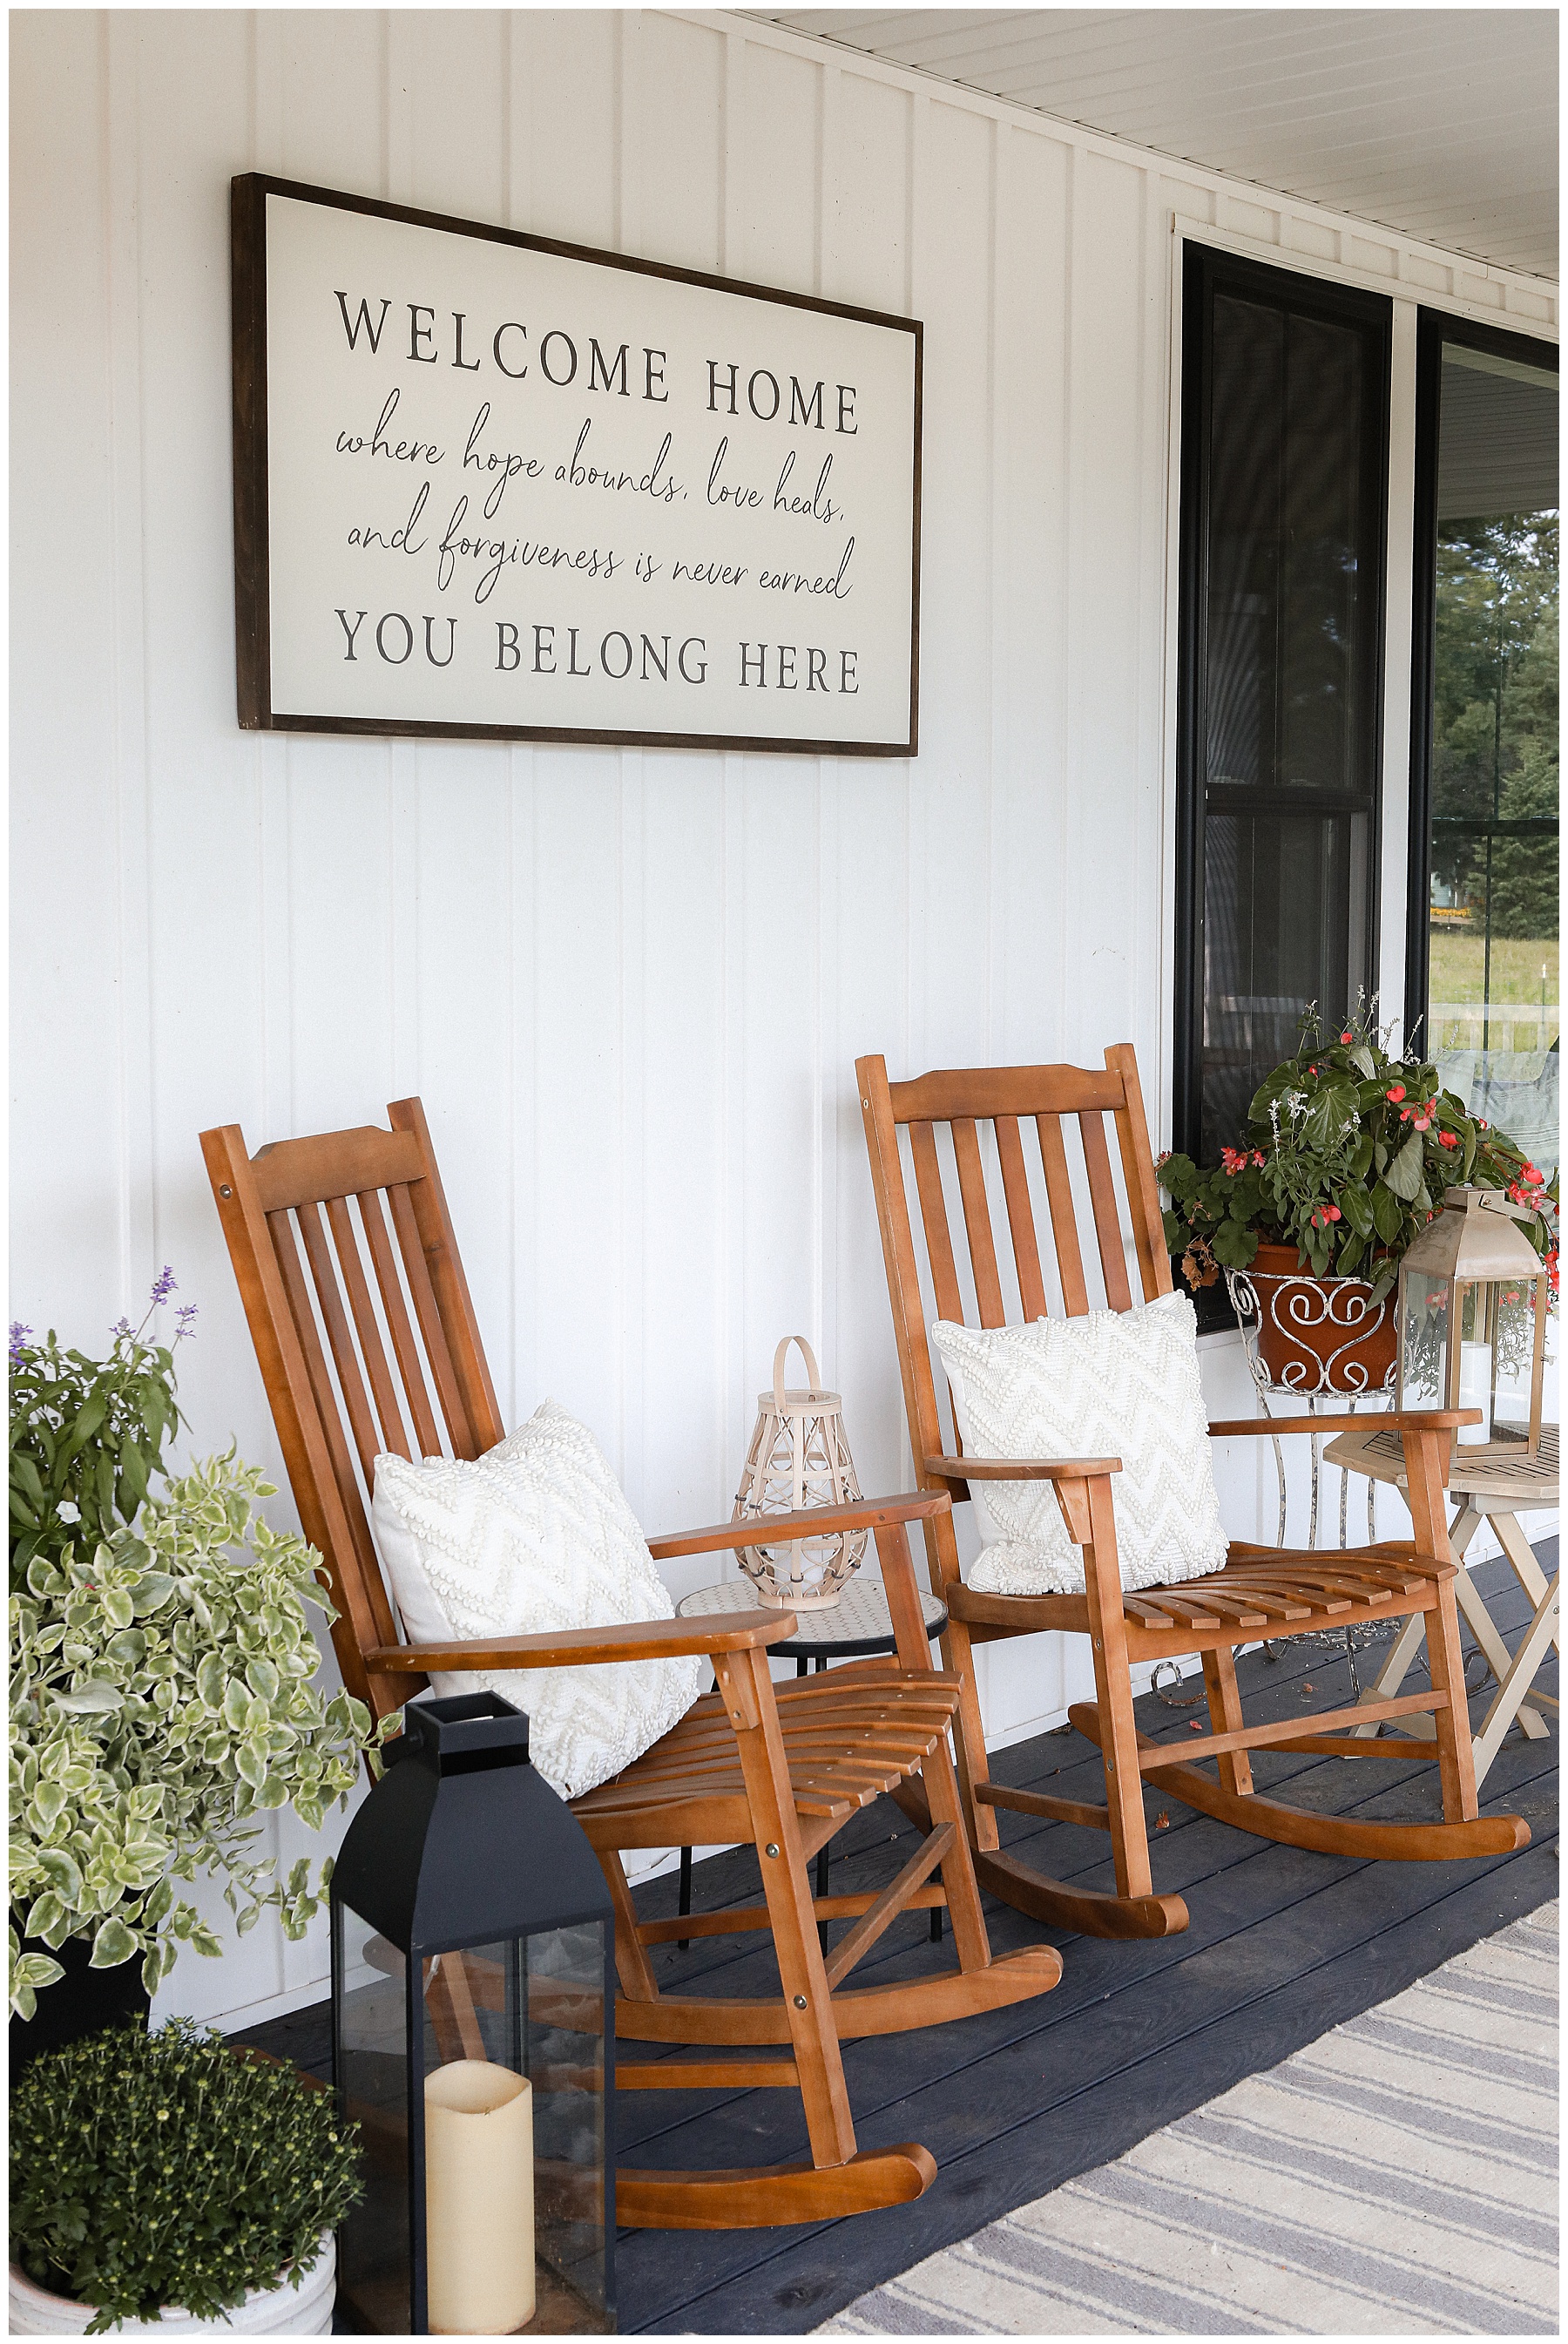 End of summer front porch decor